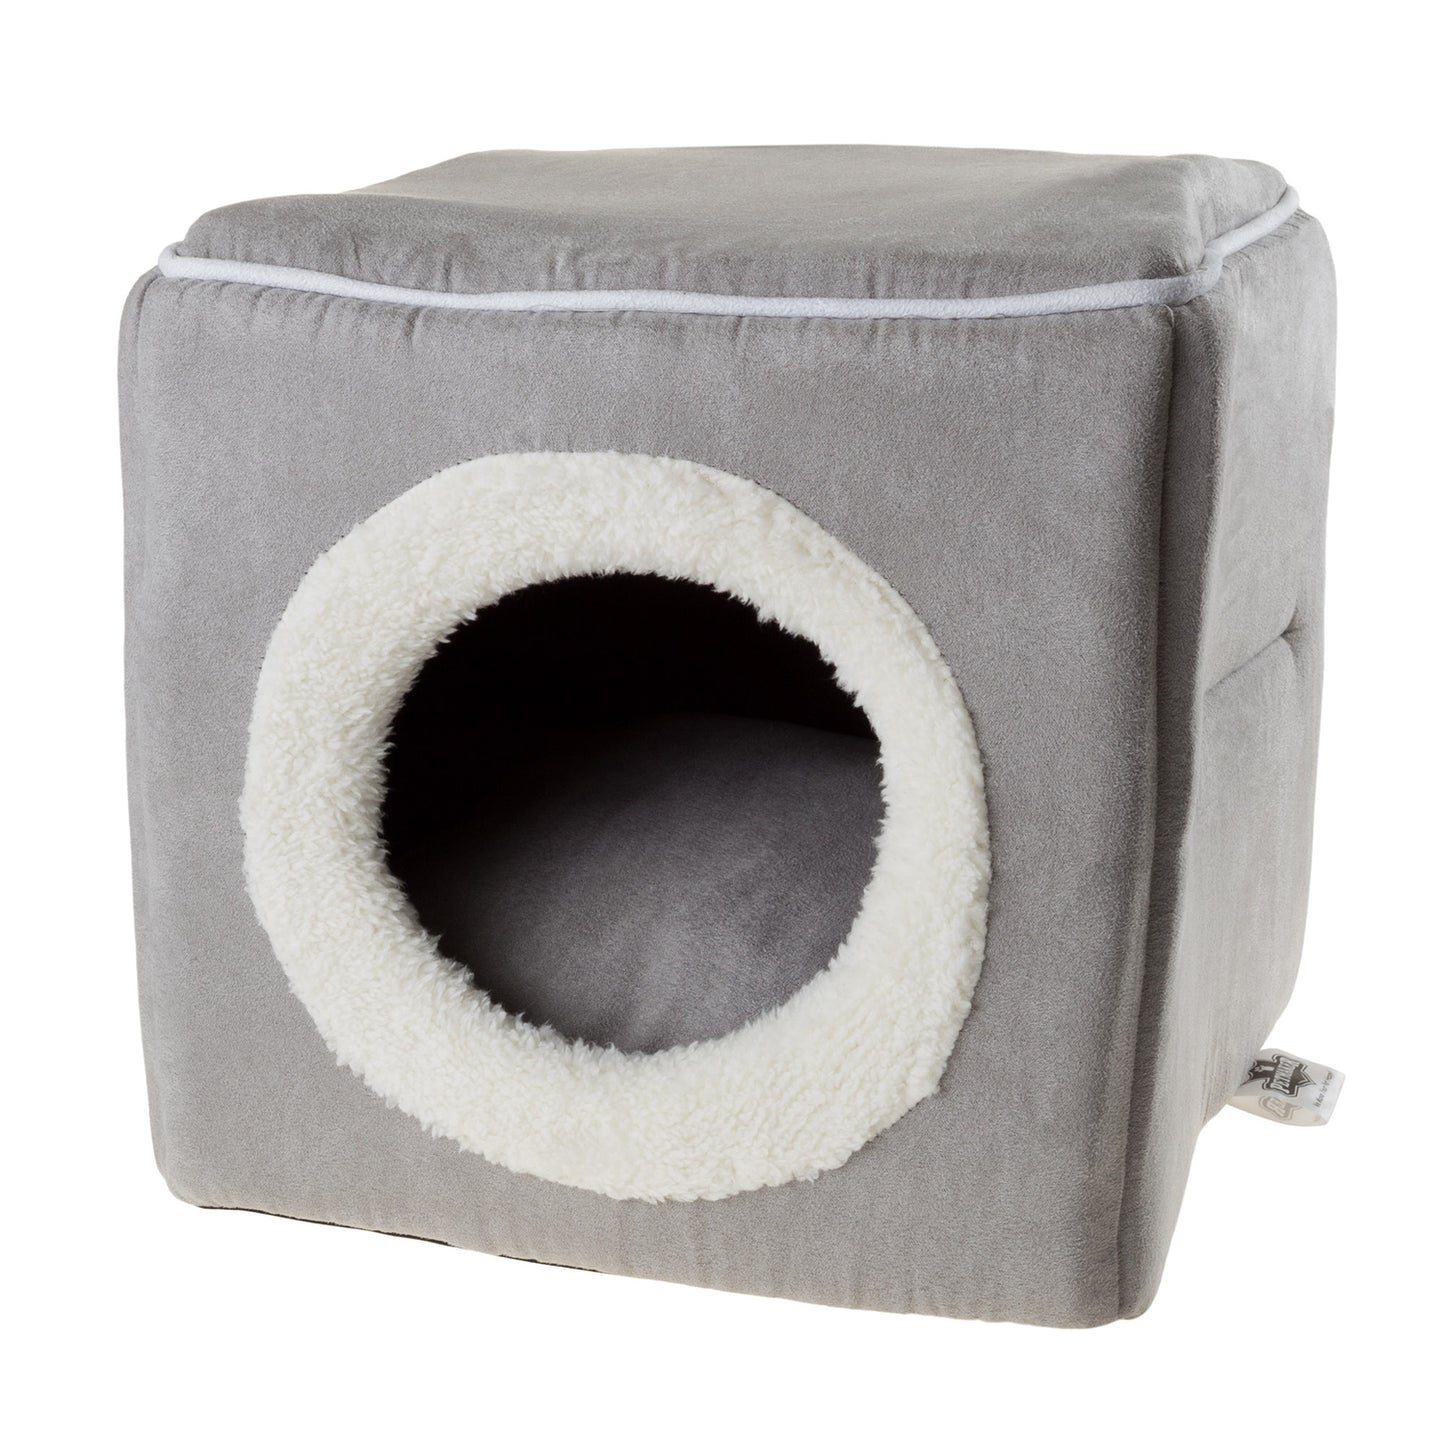 Petmaker Covered Cave Pet Cat Bed, Gray